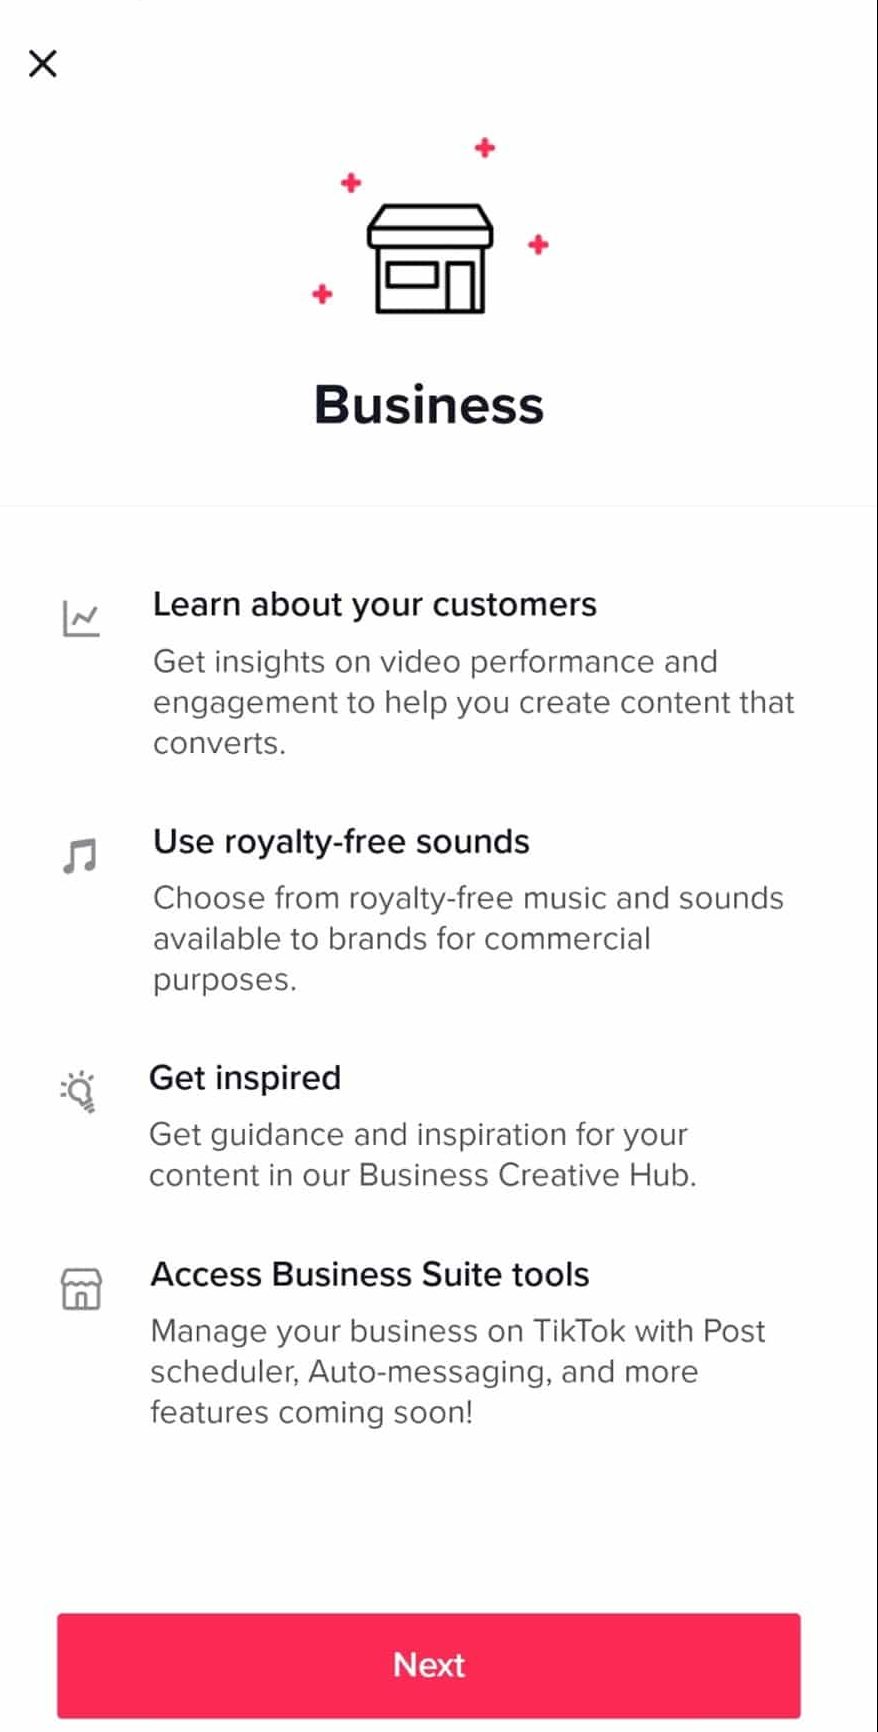 how to set up a business account on tiktok to sell stuff